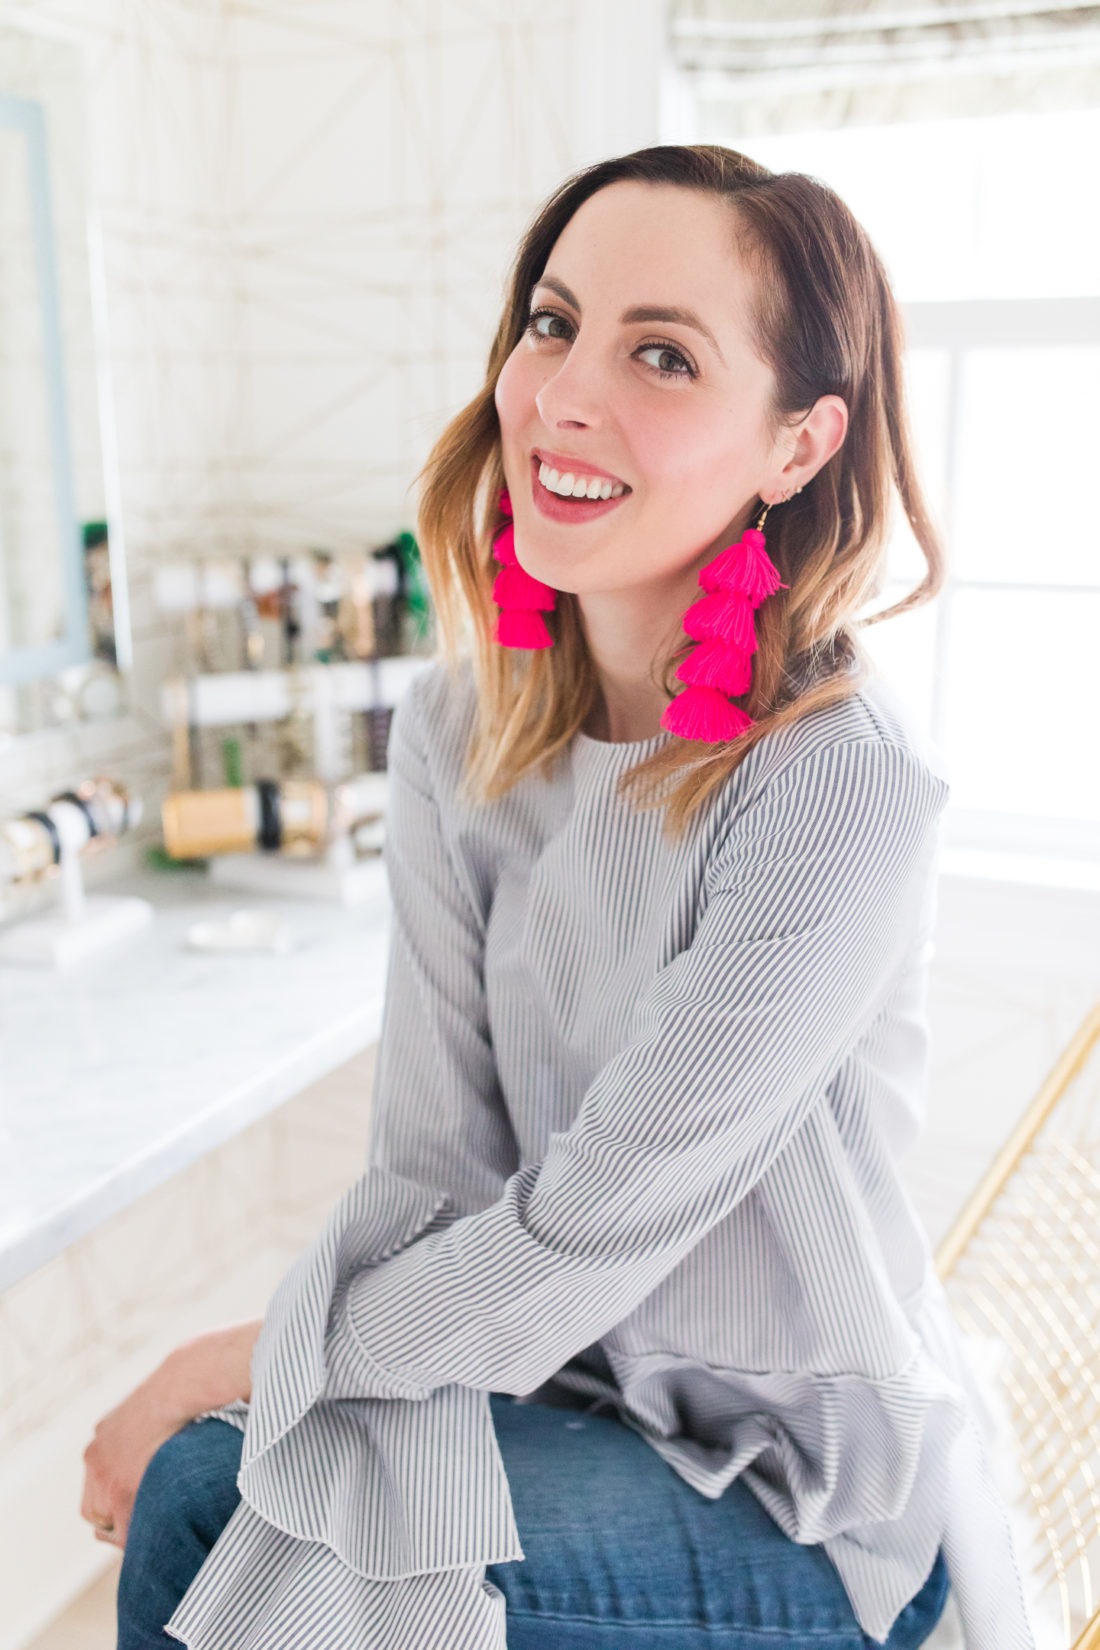 Eva Amurri Martino wears a blue and white pinstripe bell sleeve top and bright pink tassel earrings